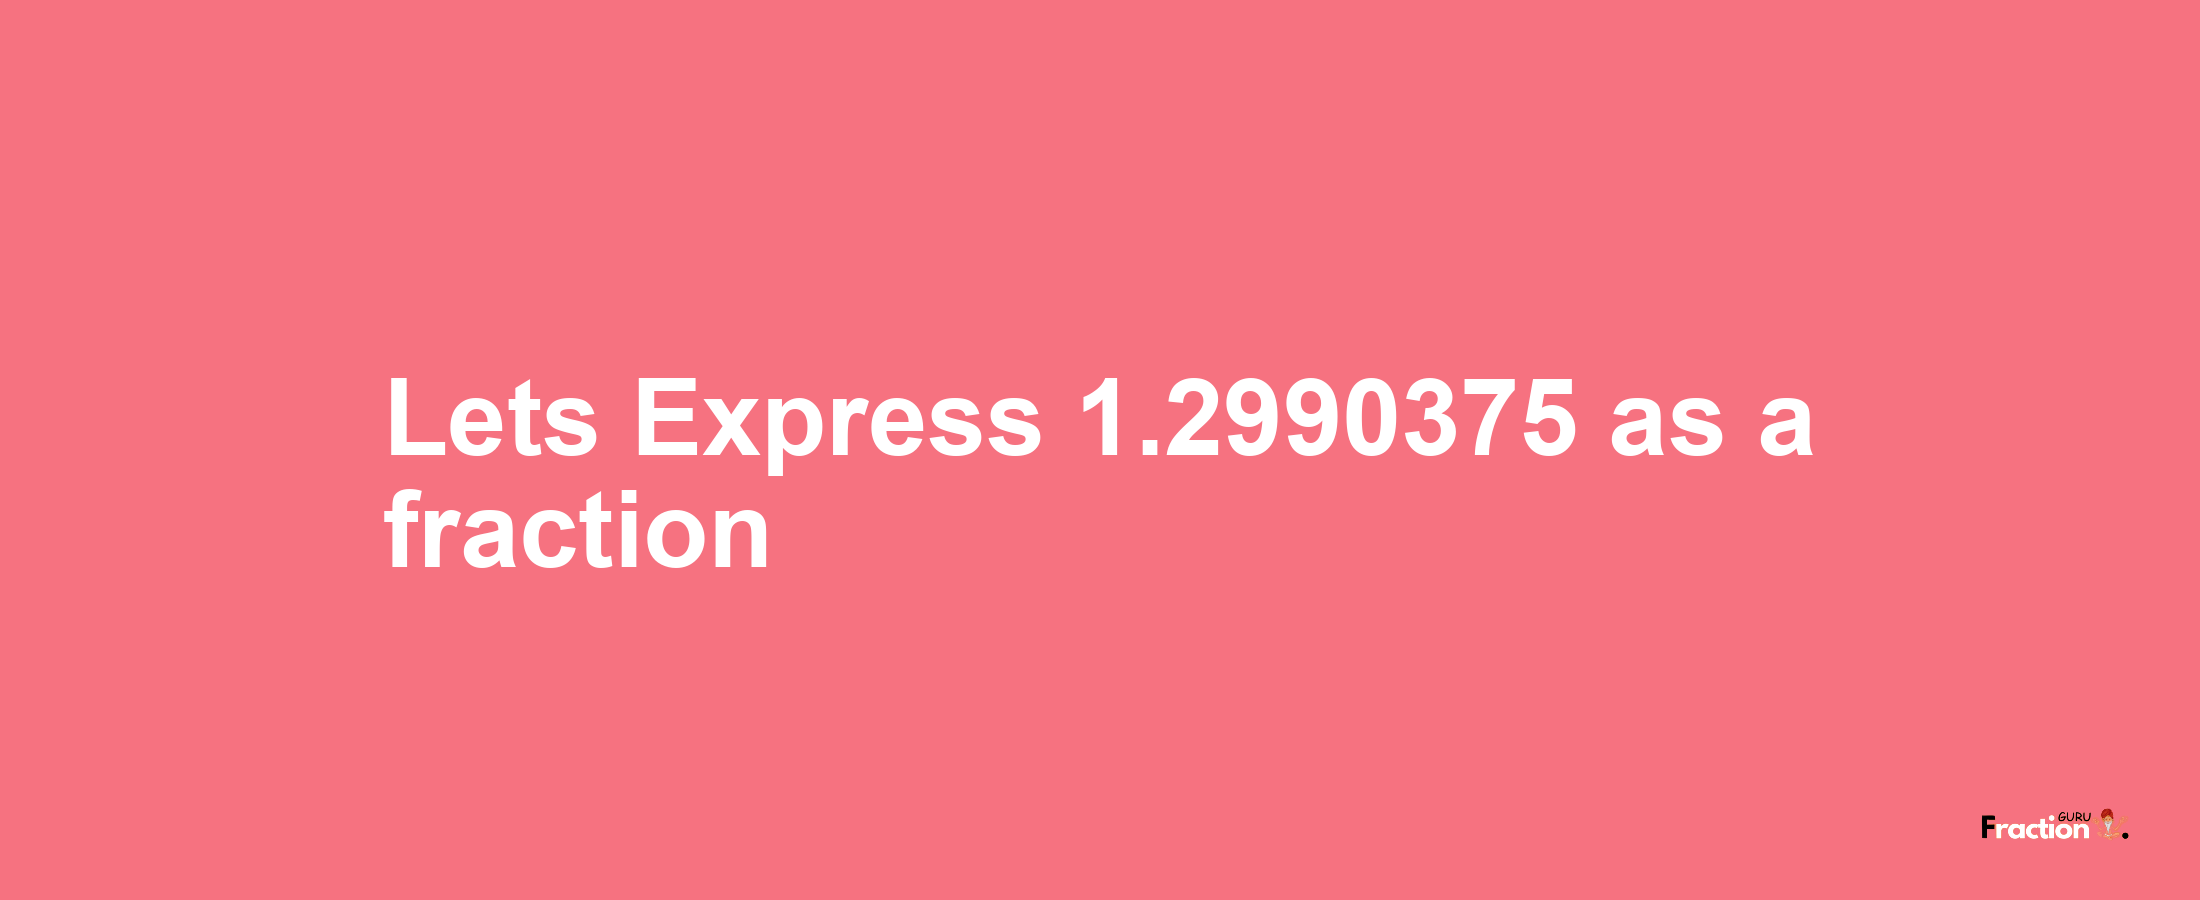 Lets Express 1.2990375 as afraction